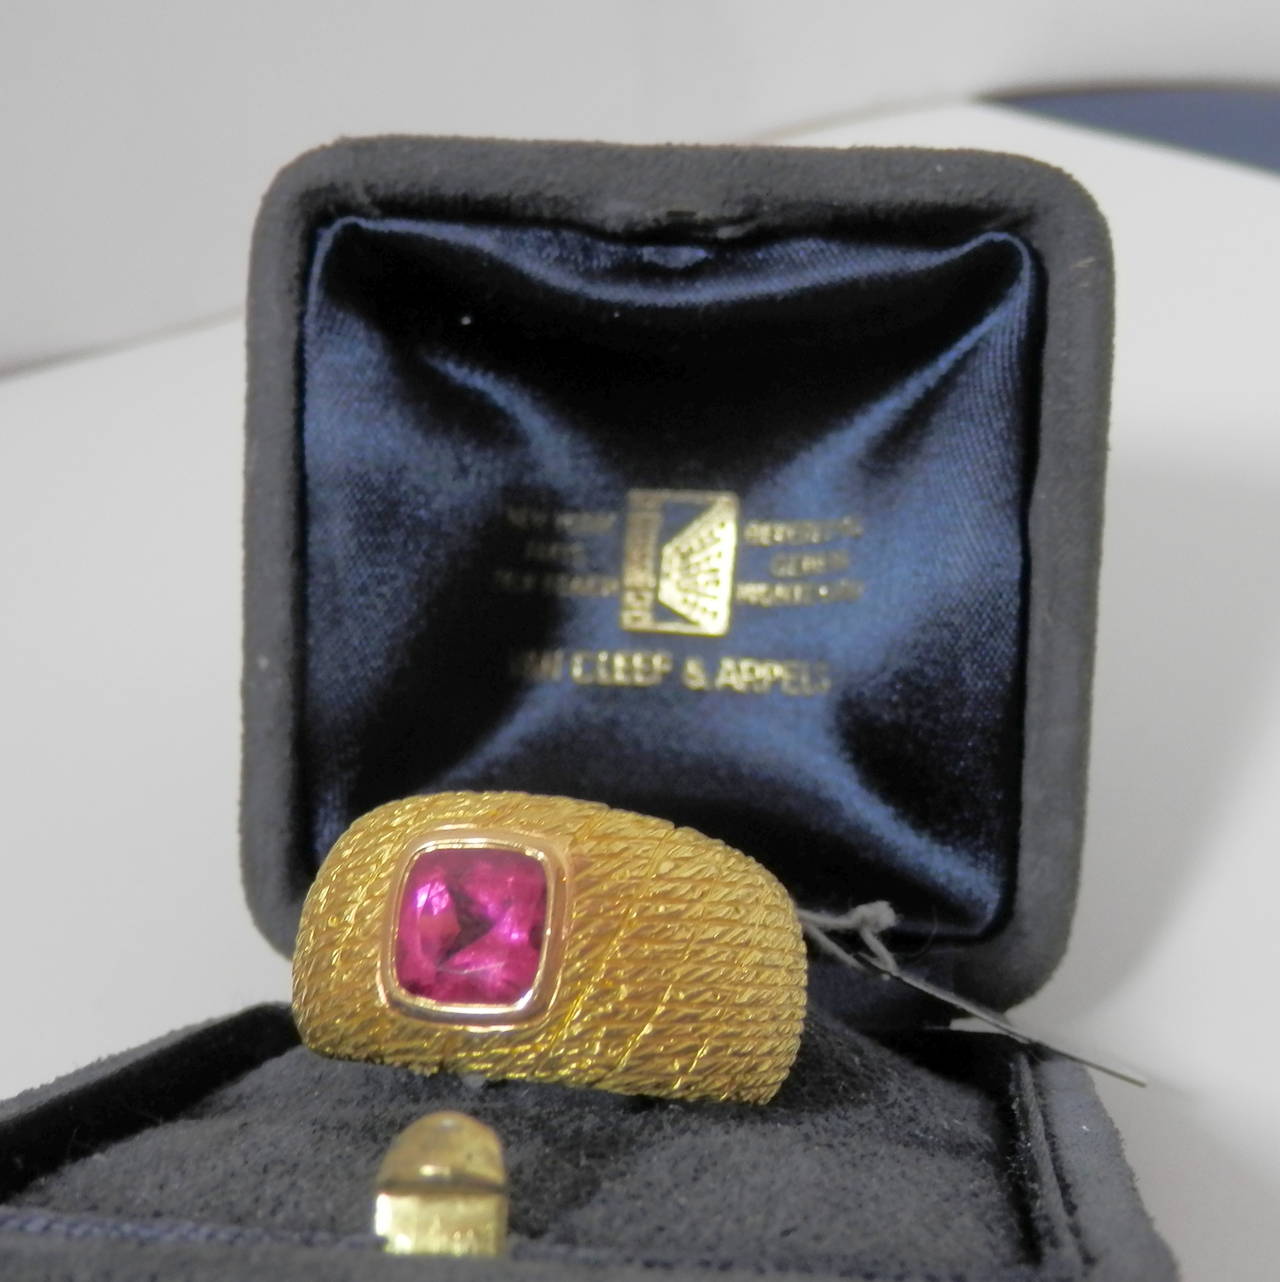 18K yellow gold holding a fine bright pink tourmaline, signed VC&A France, and numbered 5K 902-3, bearing French hallmarks. Can be sized, now a 6.